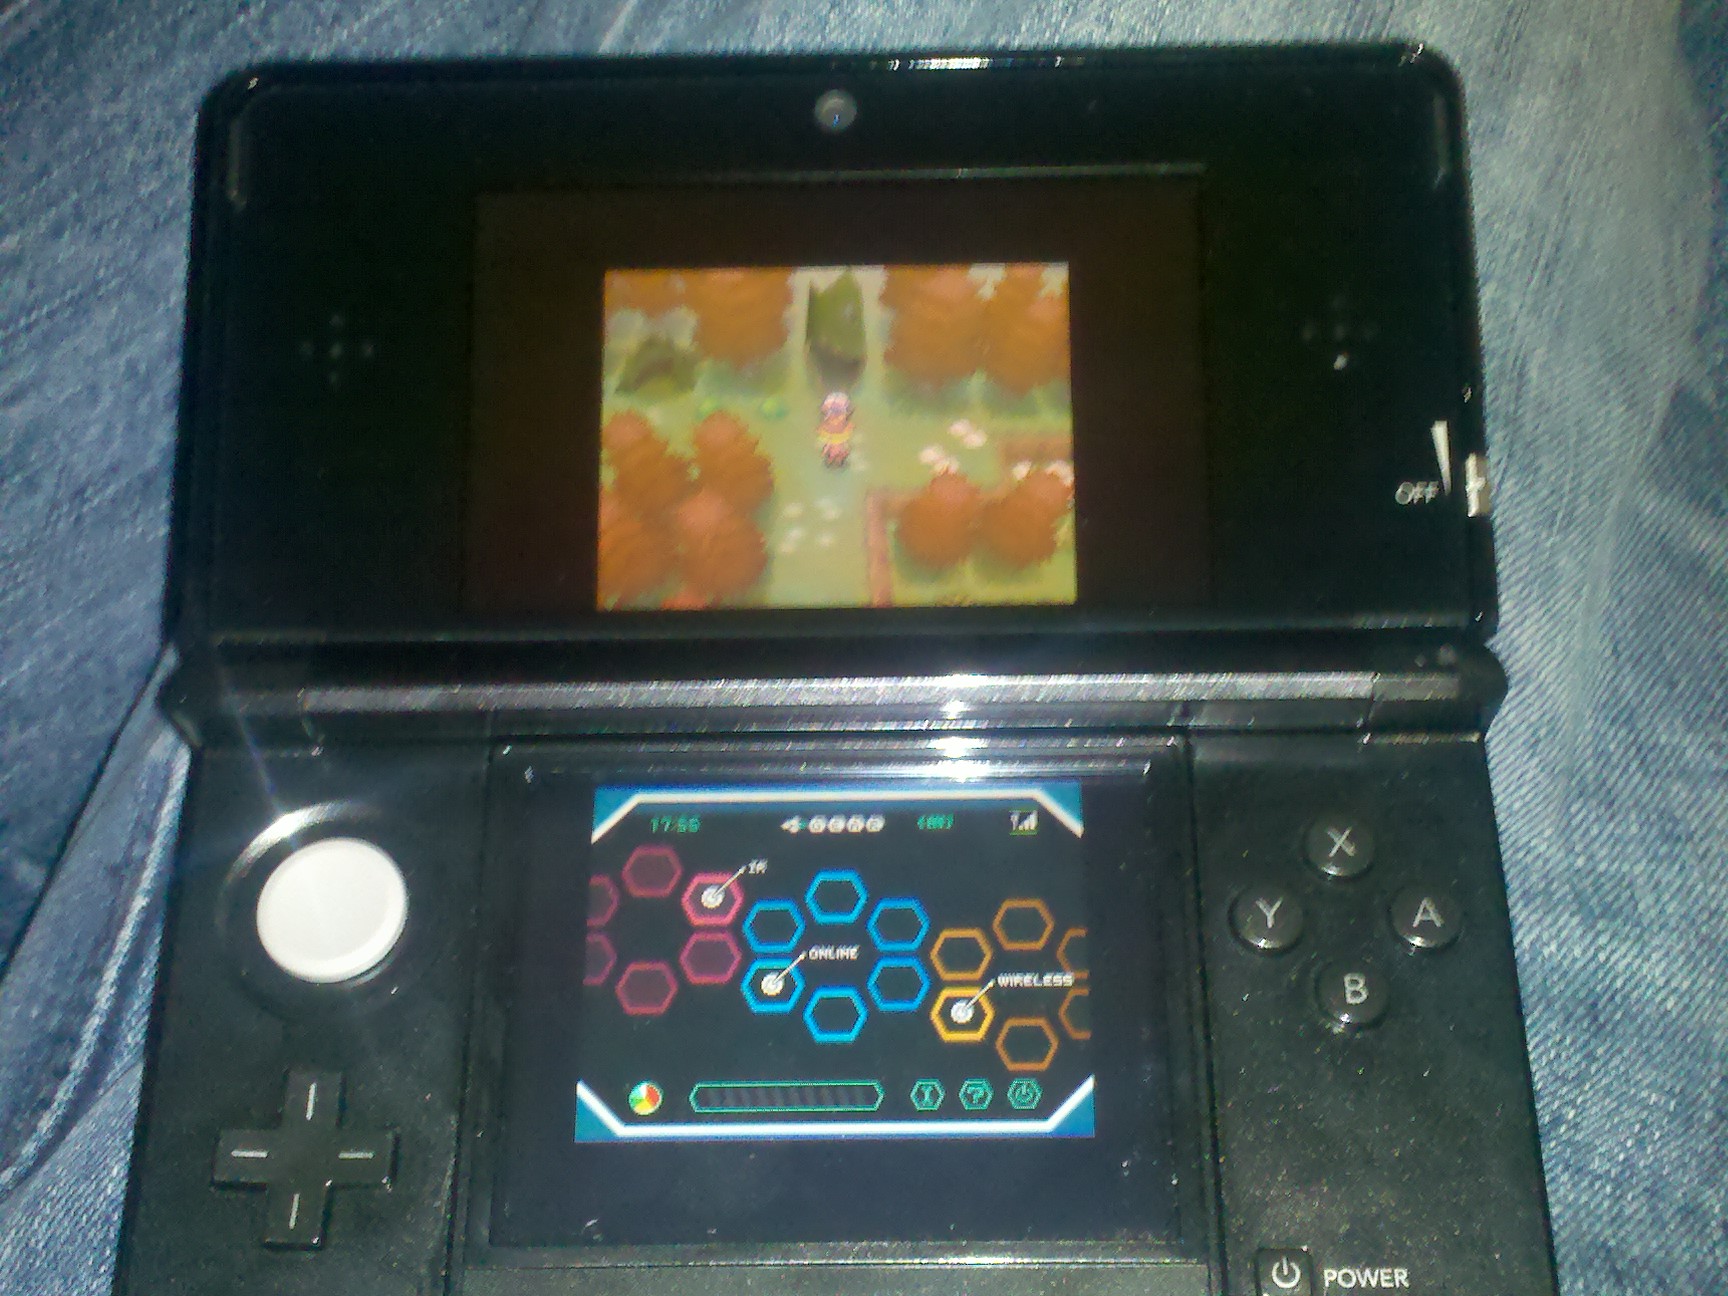 DS game in native resolution